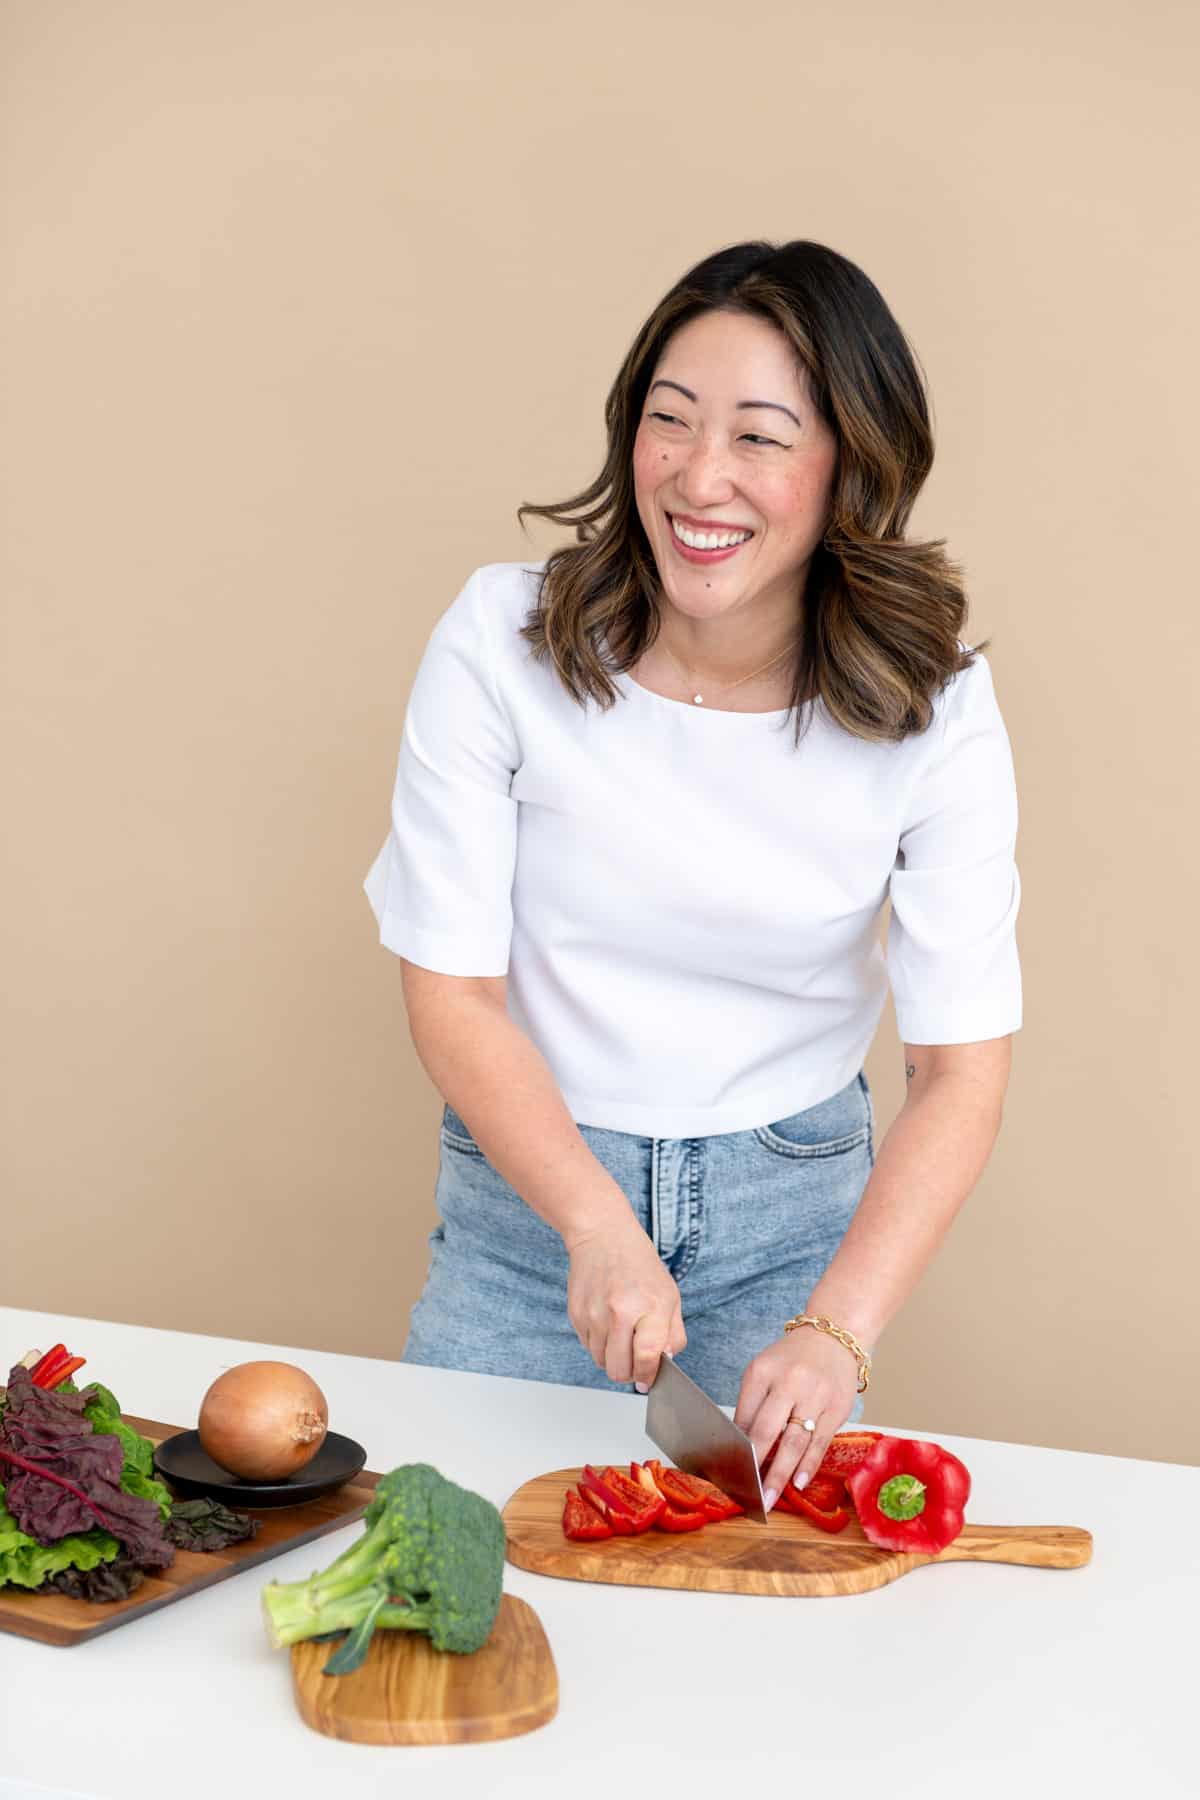 Julie Chiou with white shirt and light blue jeans smiling as she is slicing a red bell pepper